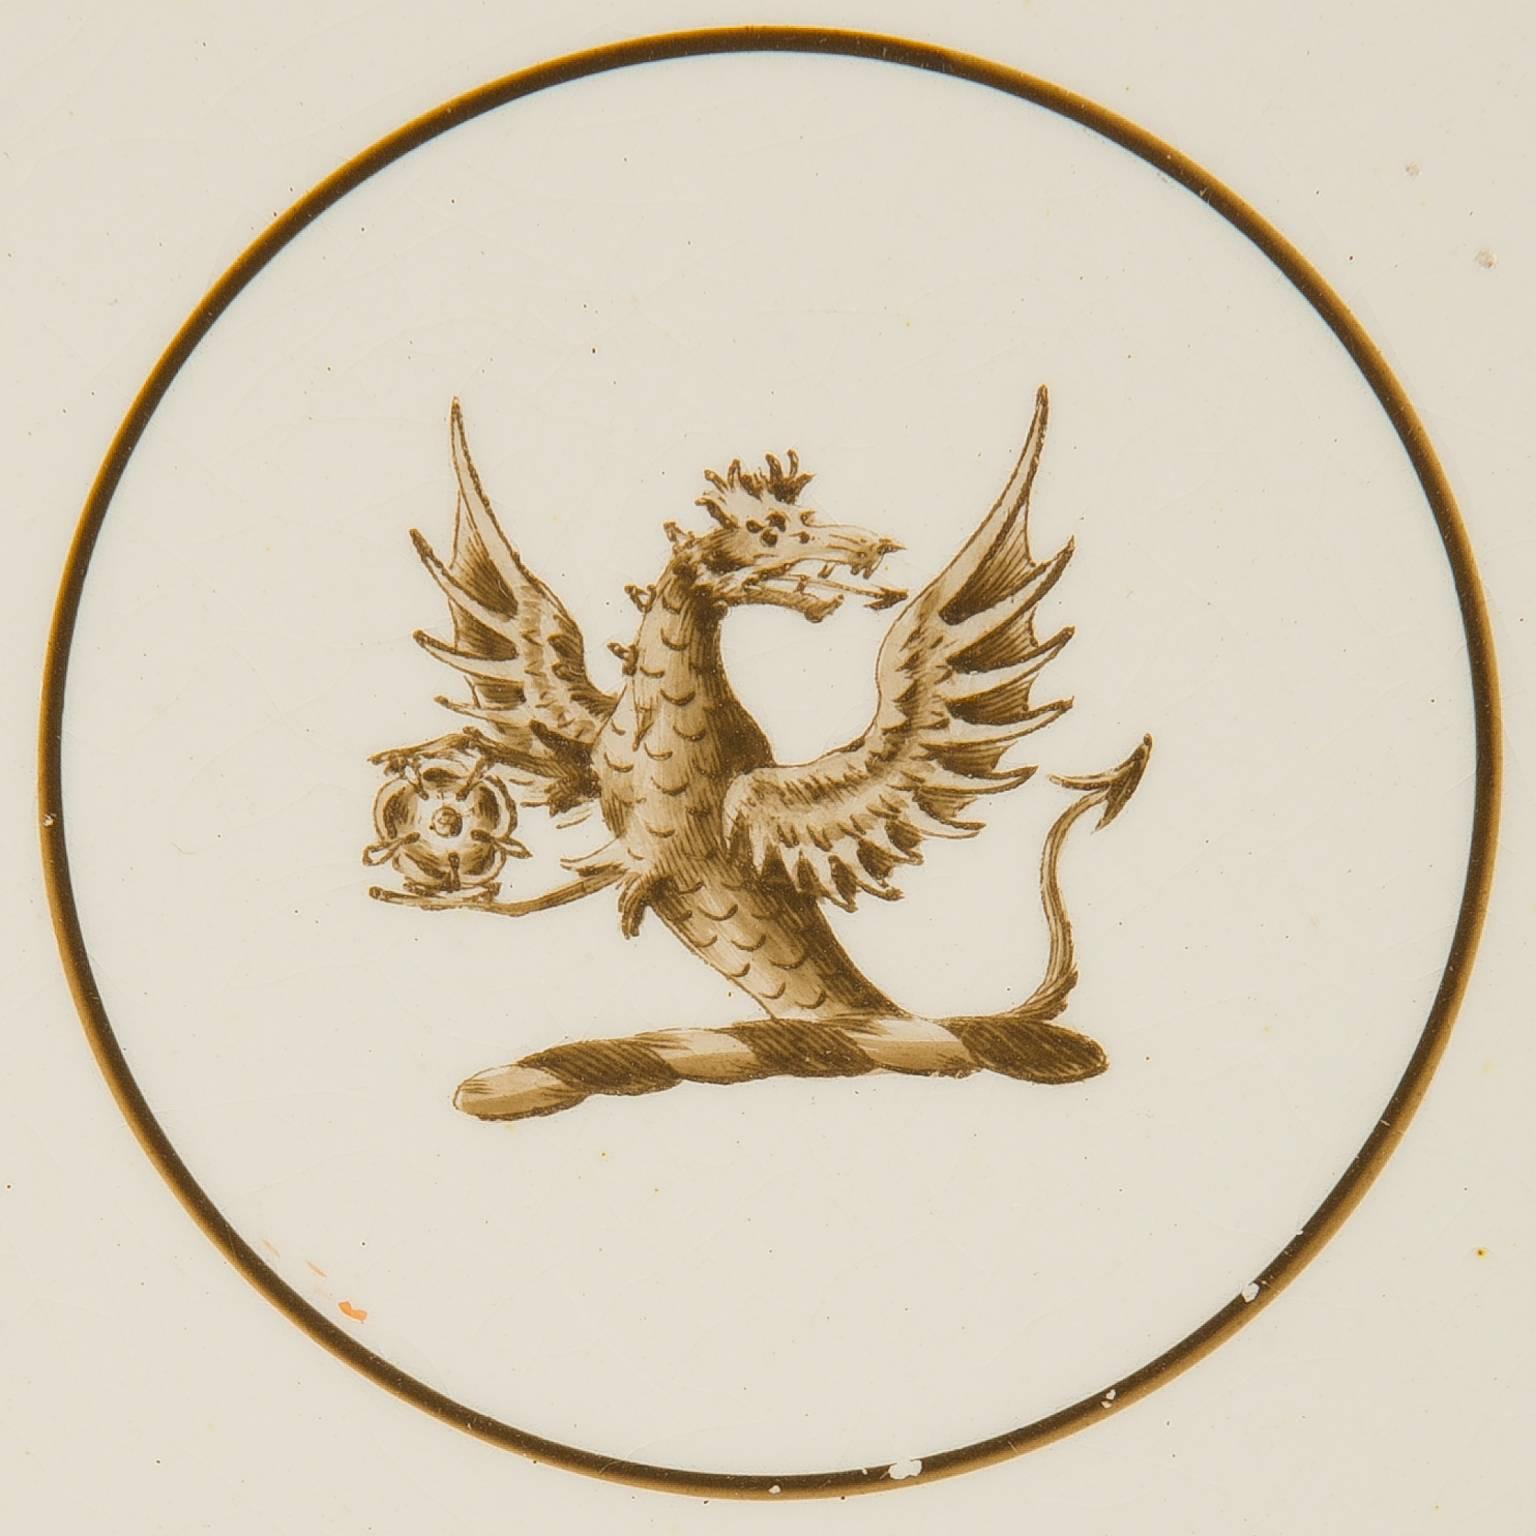 Regency Wedgwood Creamware Dishes with a Dragon Crest